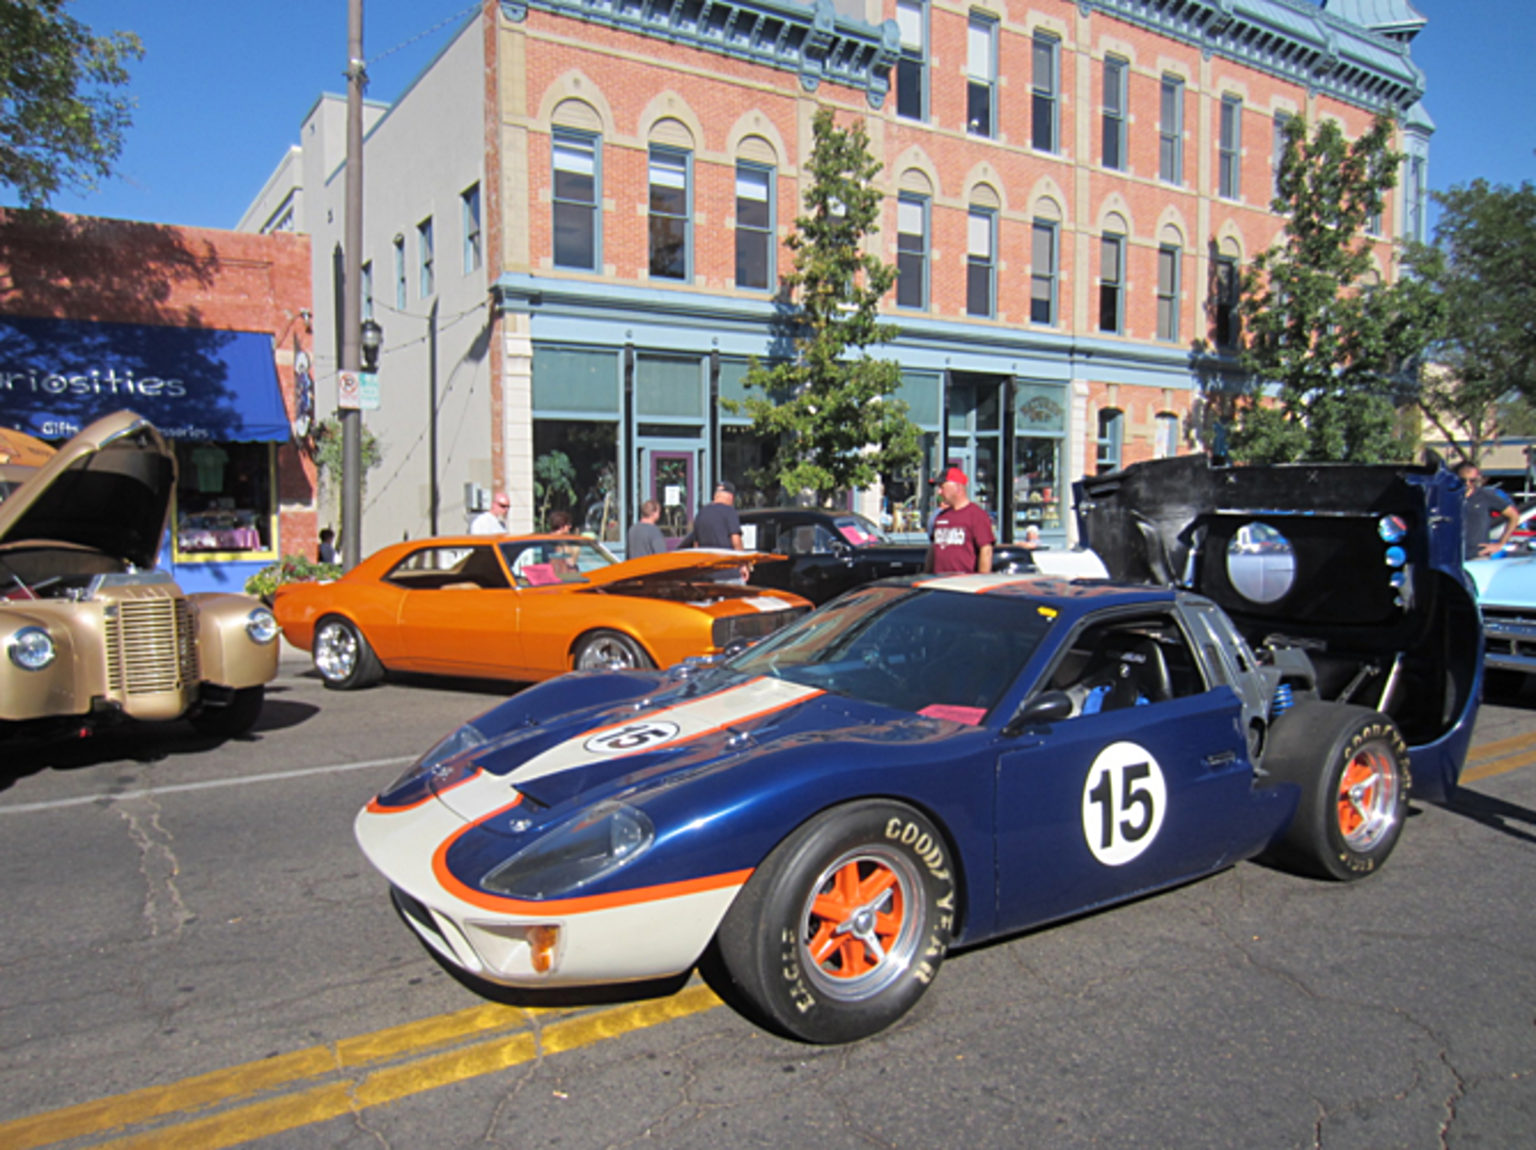 The Old Town Car Show returns on September 23